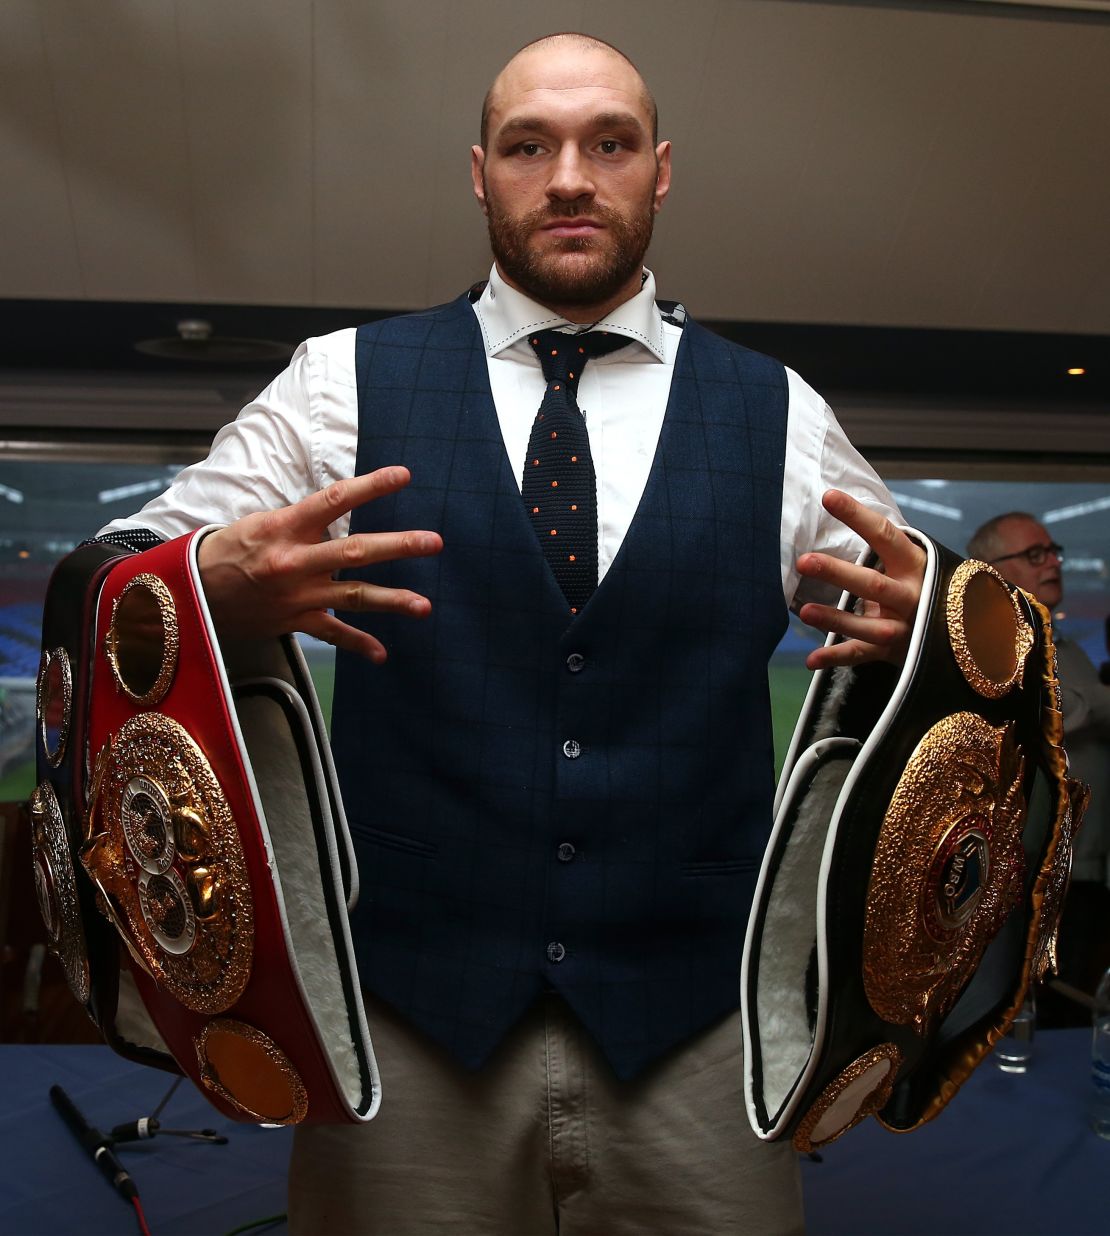 Tyson Fury poses with his heavyweight belts in happier times.